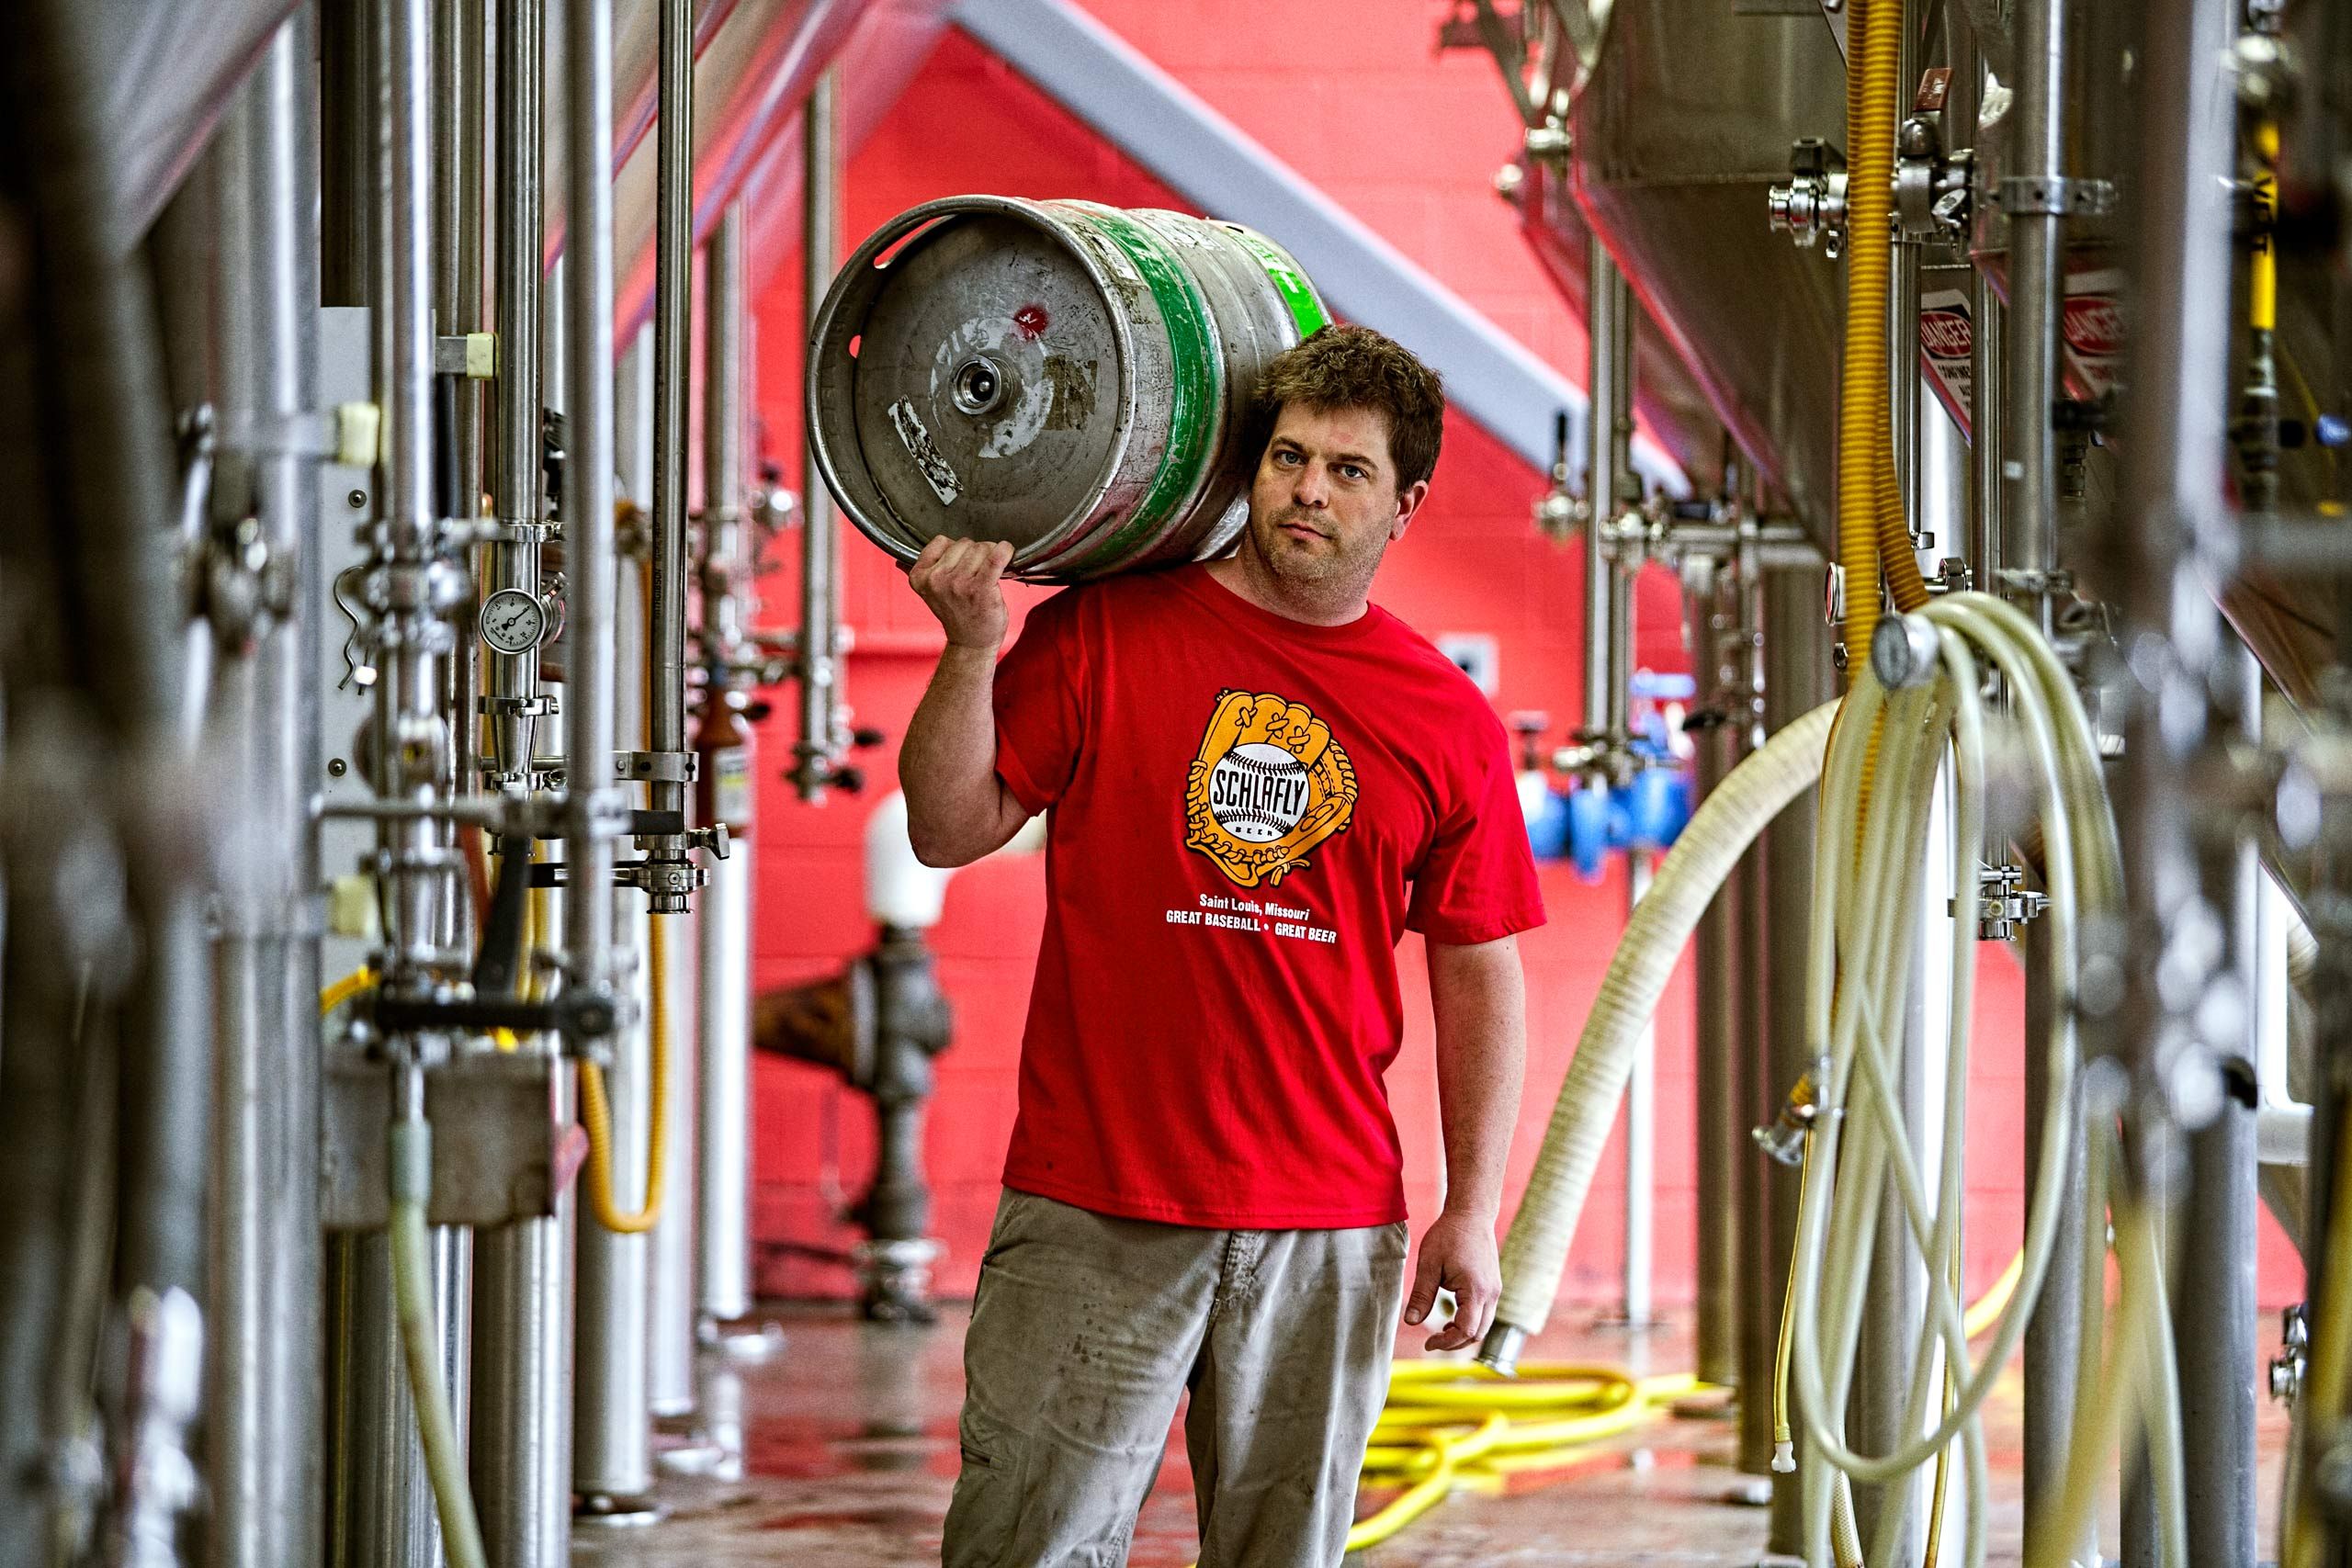 Brewmaster Holding a Keg of Beer